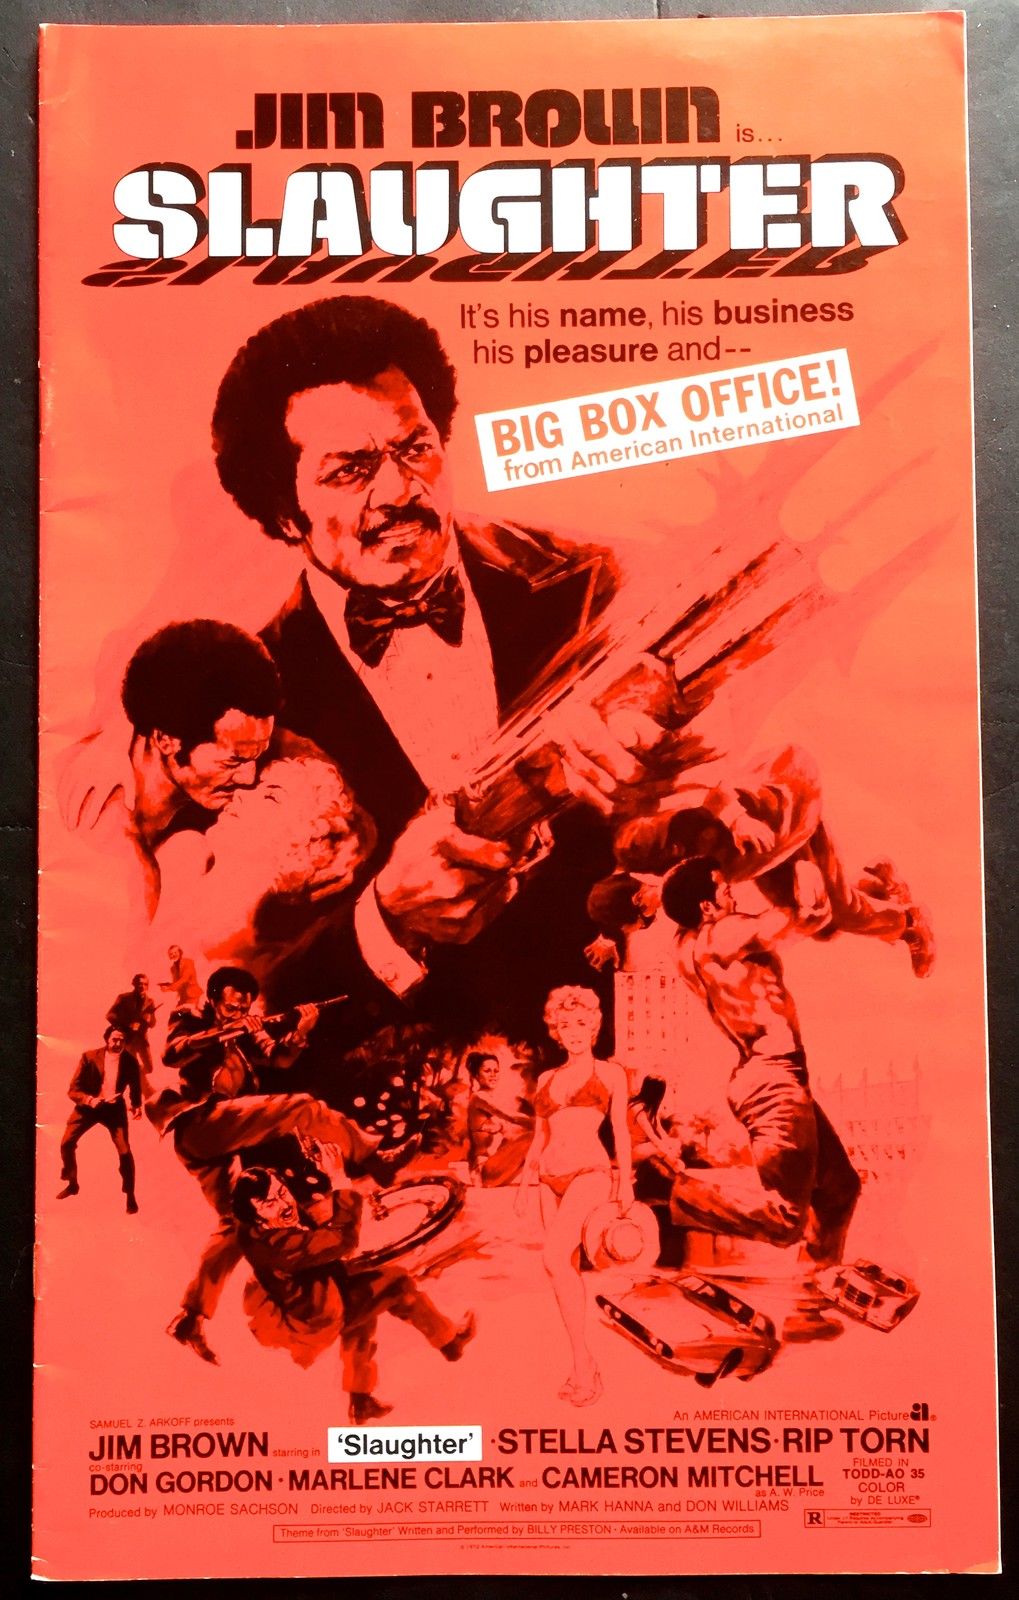 VINTAGE Rosey Grier “THE THING WITH TWO HEADS” Original 1972 Theater Pressbook